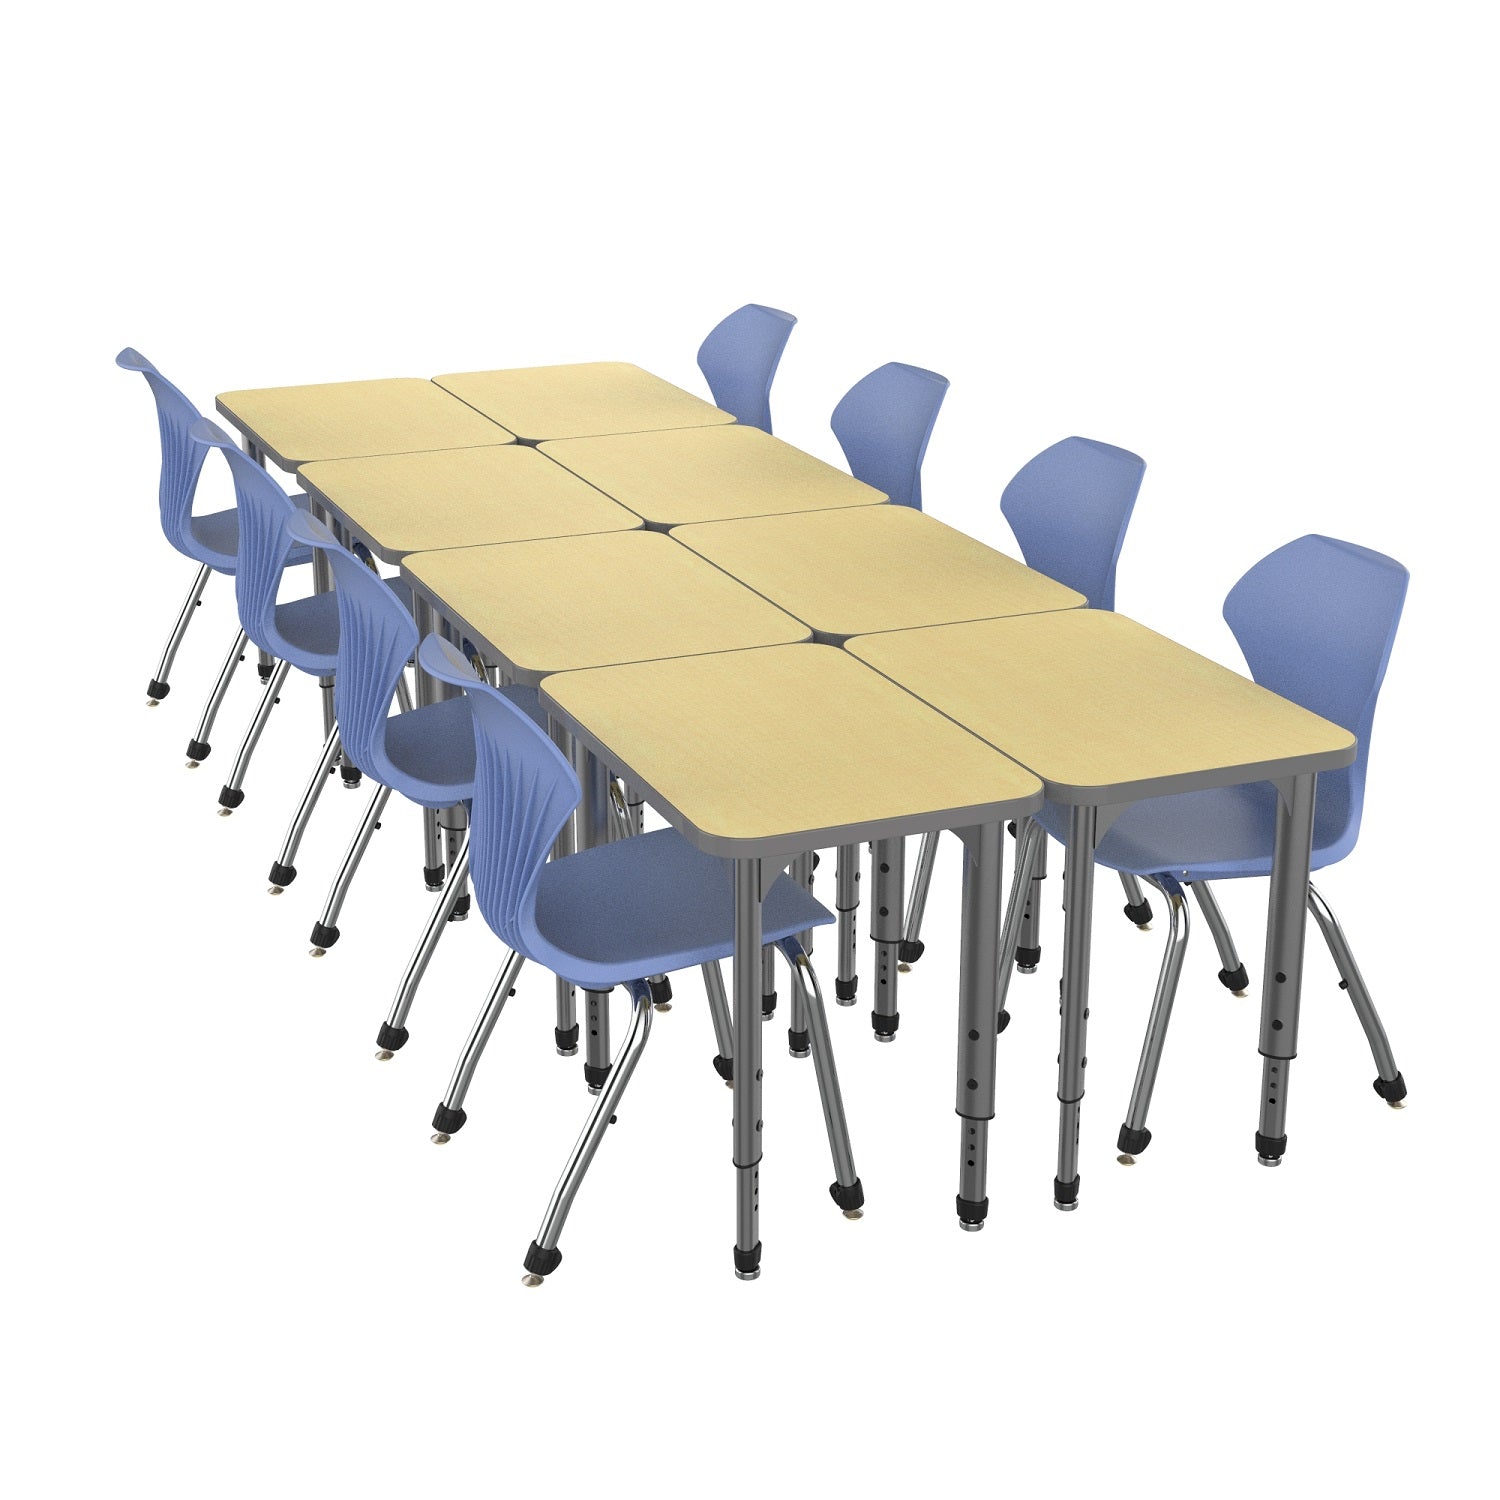 Apex Classroom Desk and Chair Package, 8 Rectangle Collaborative Student Desks, 20" x 30", with 8 Apex Stack Chairs